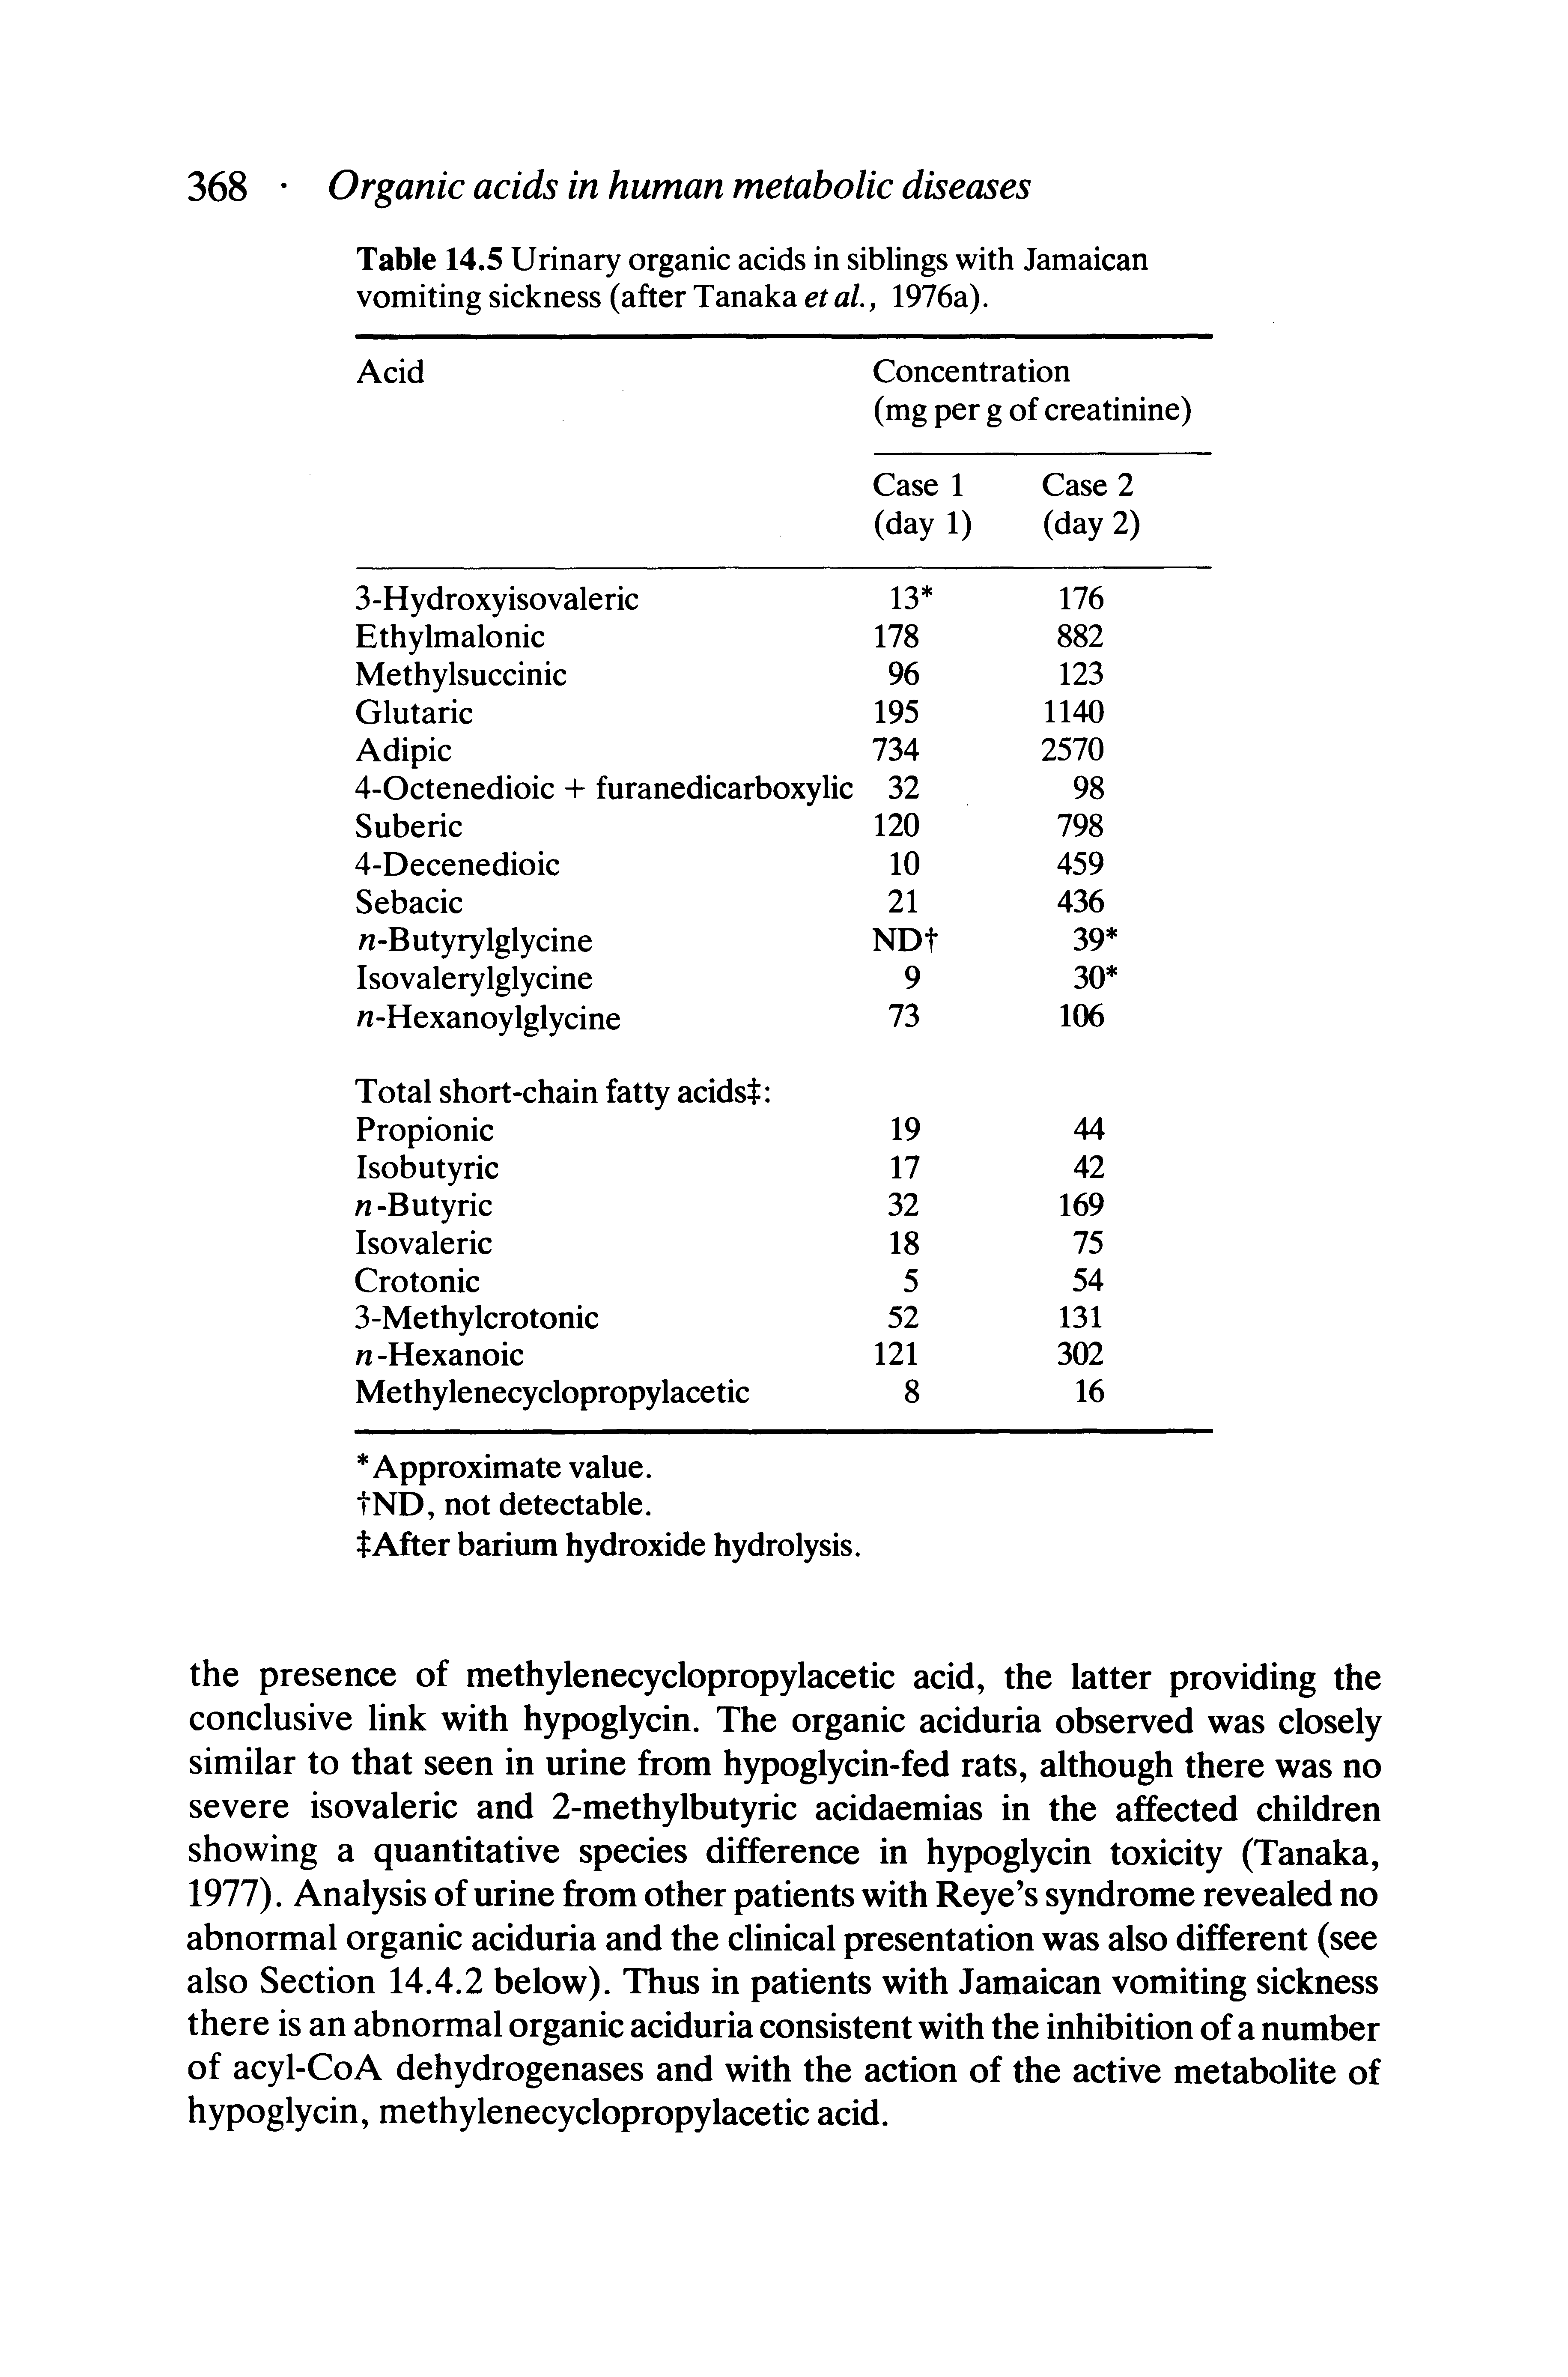 Table 14.5 Urinary organic acids in siblings with Jamaican vomiting sickness (after Tanaka et al, 1976a).